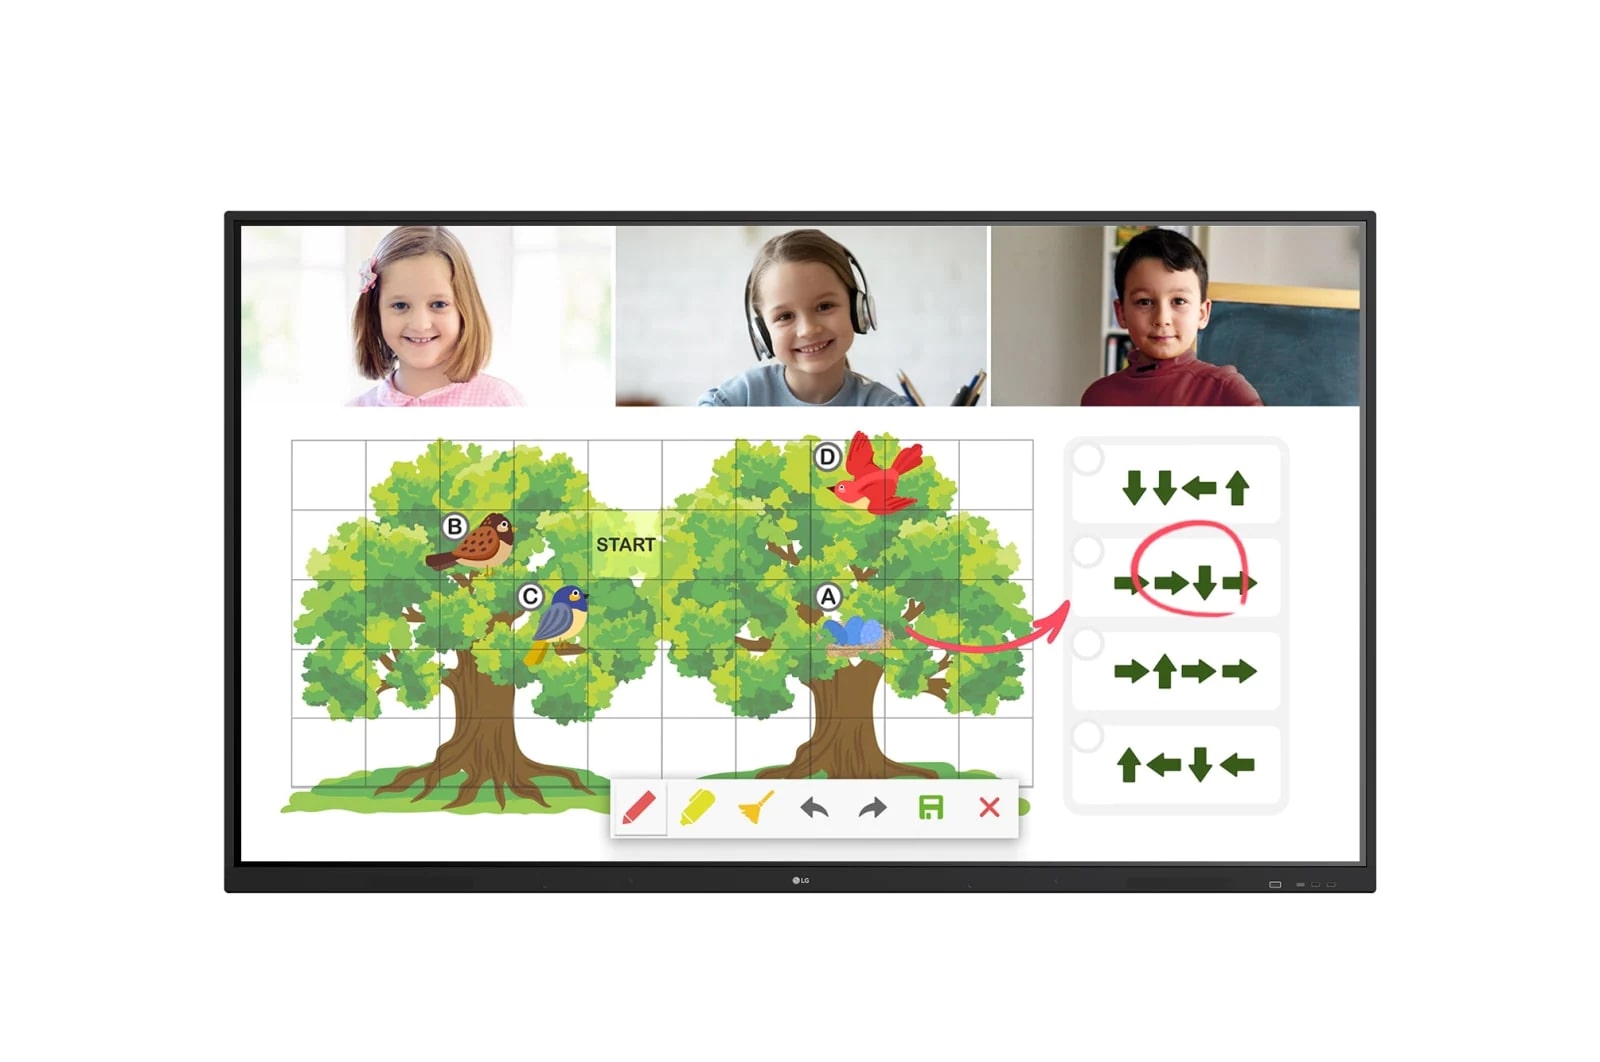 LG 86" CreateBoard™ - Interactive Whiteboard with Writing Software and Built-in Front Speakers, 86TR3PJ-B